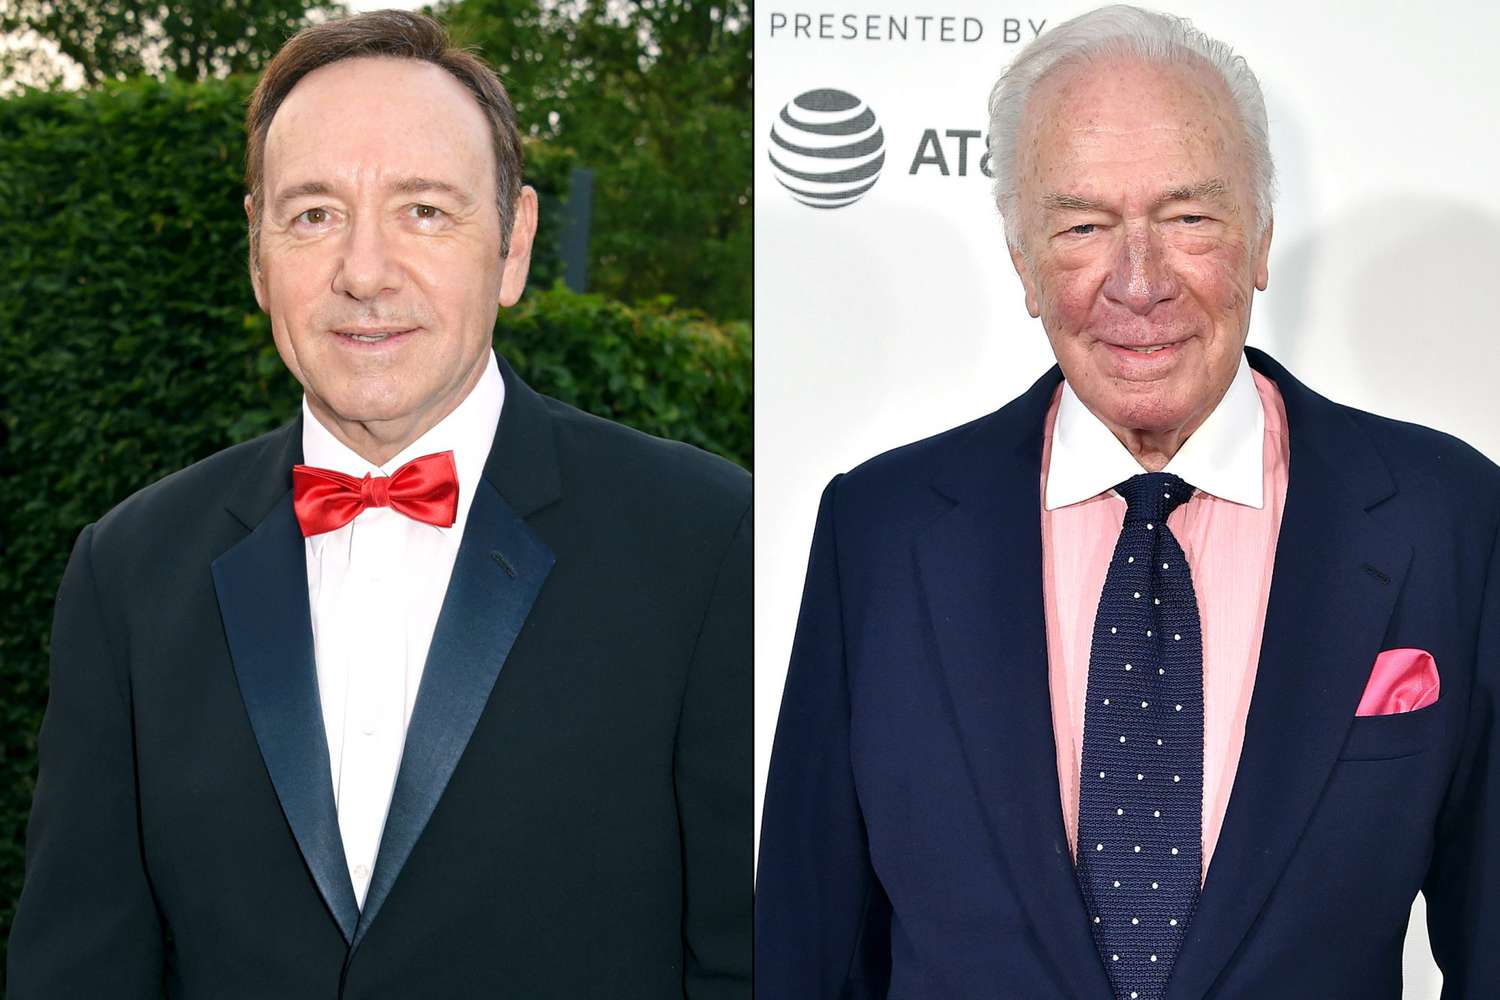 Kevin Spacey / Christopher Plummer